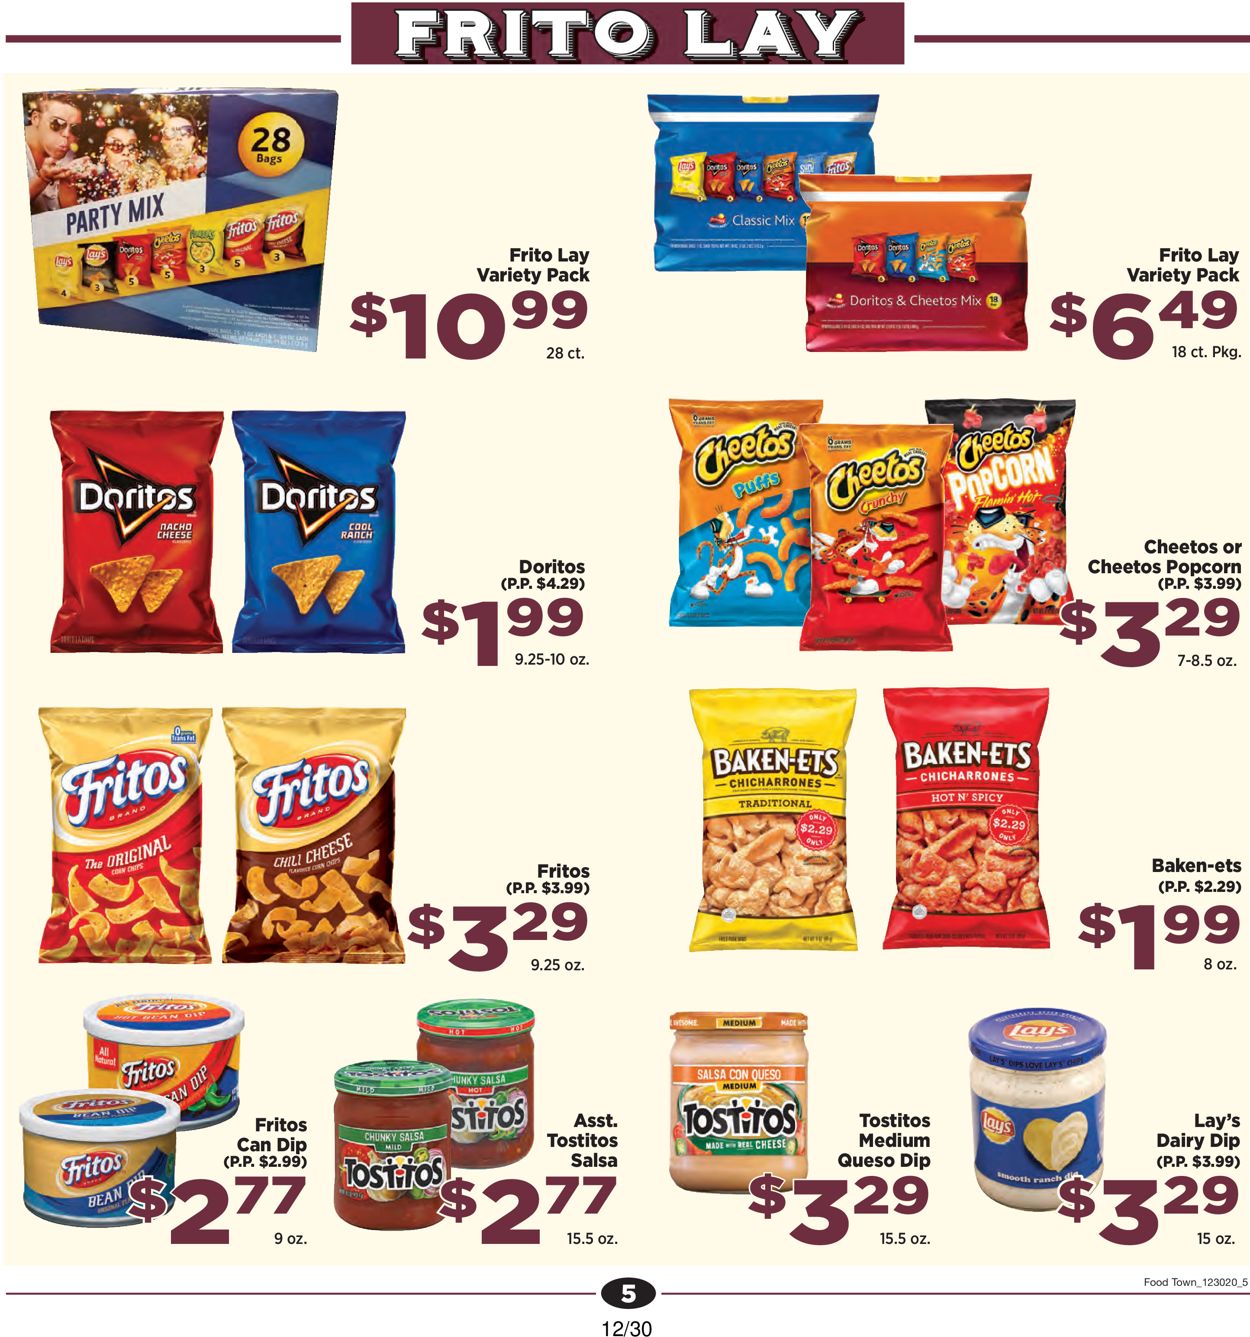 Food Town Specials & Grocery Ad Weekly Ad Circular - valid 12/30-01/05/2021 (Page 5)